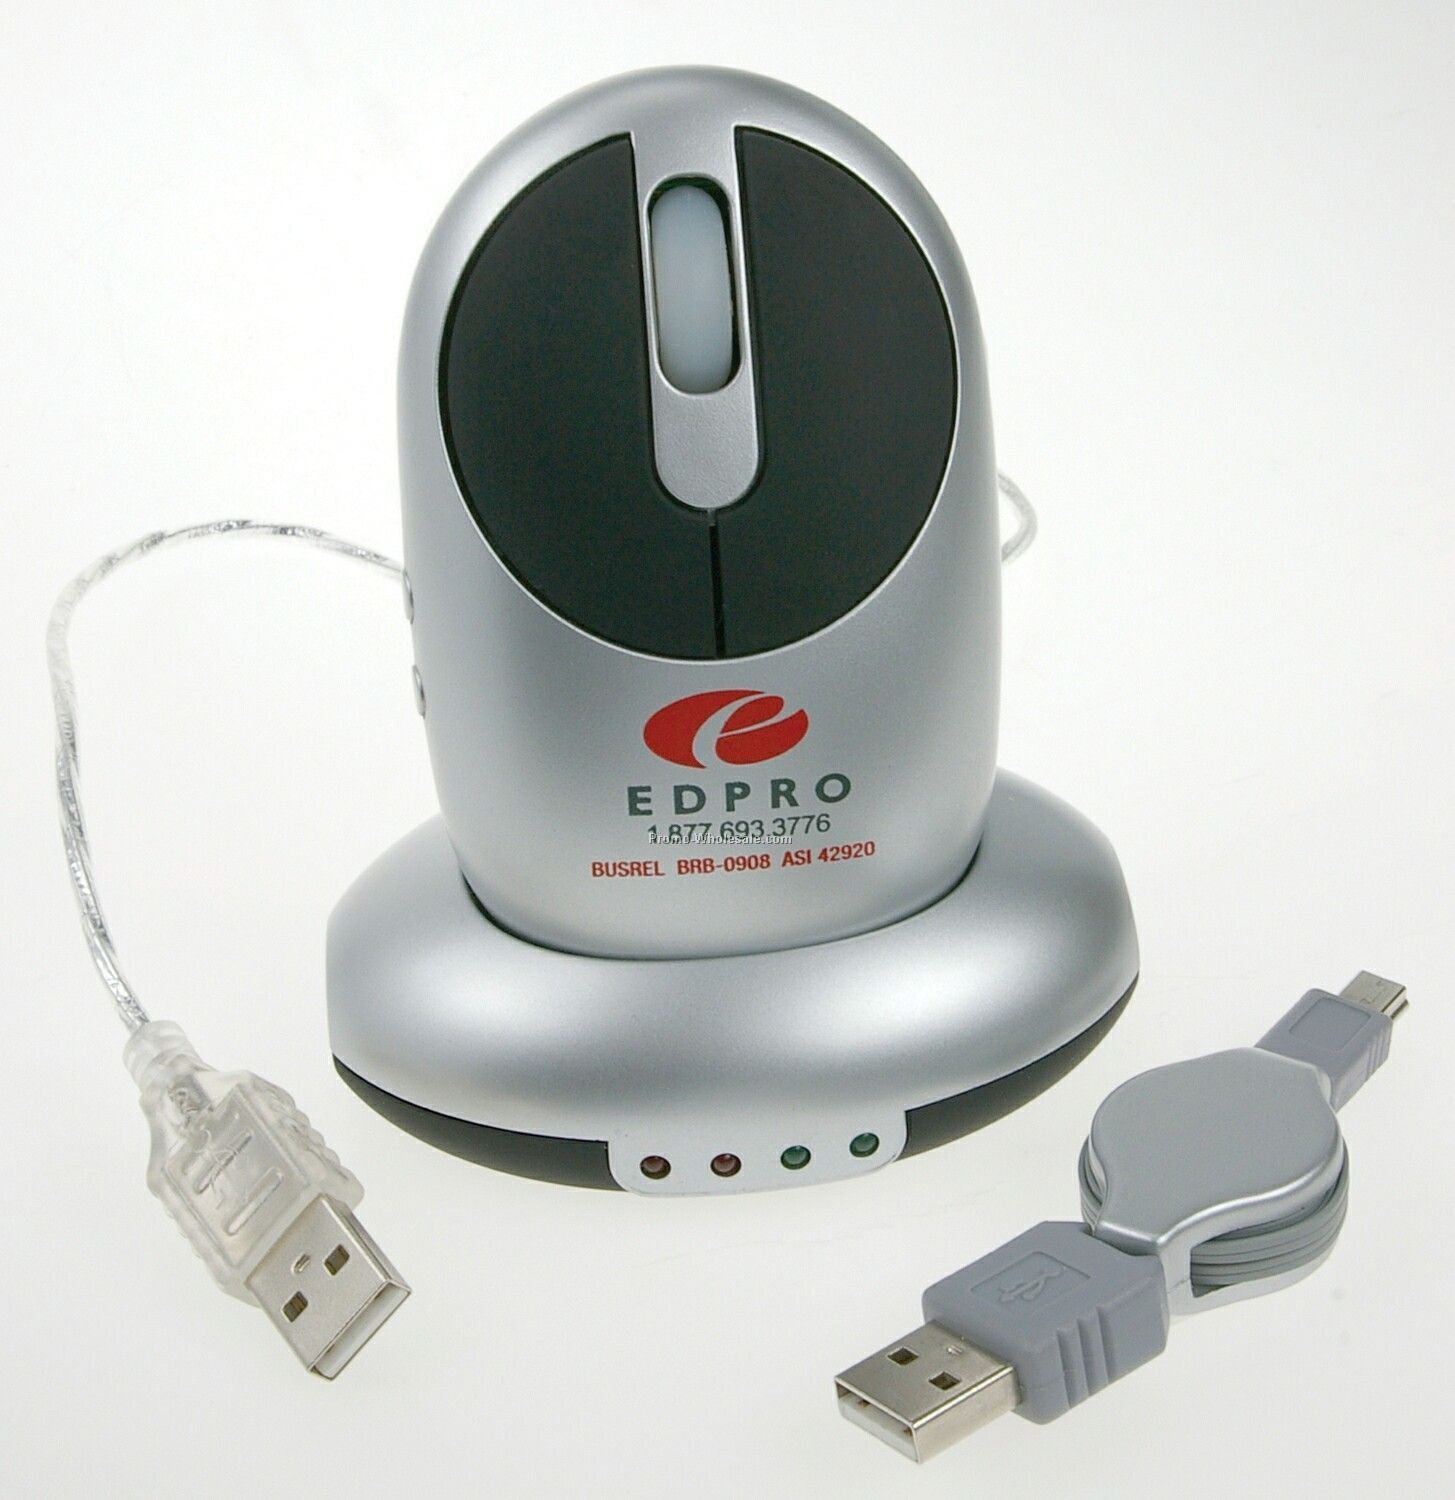 USB Rechargeable Wireless Mouse & Hub